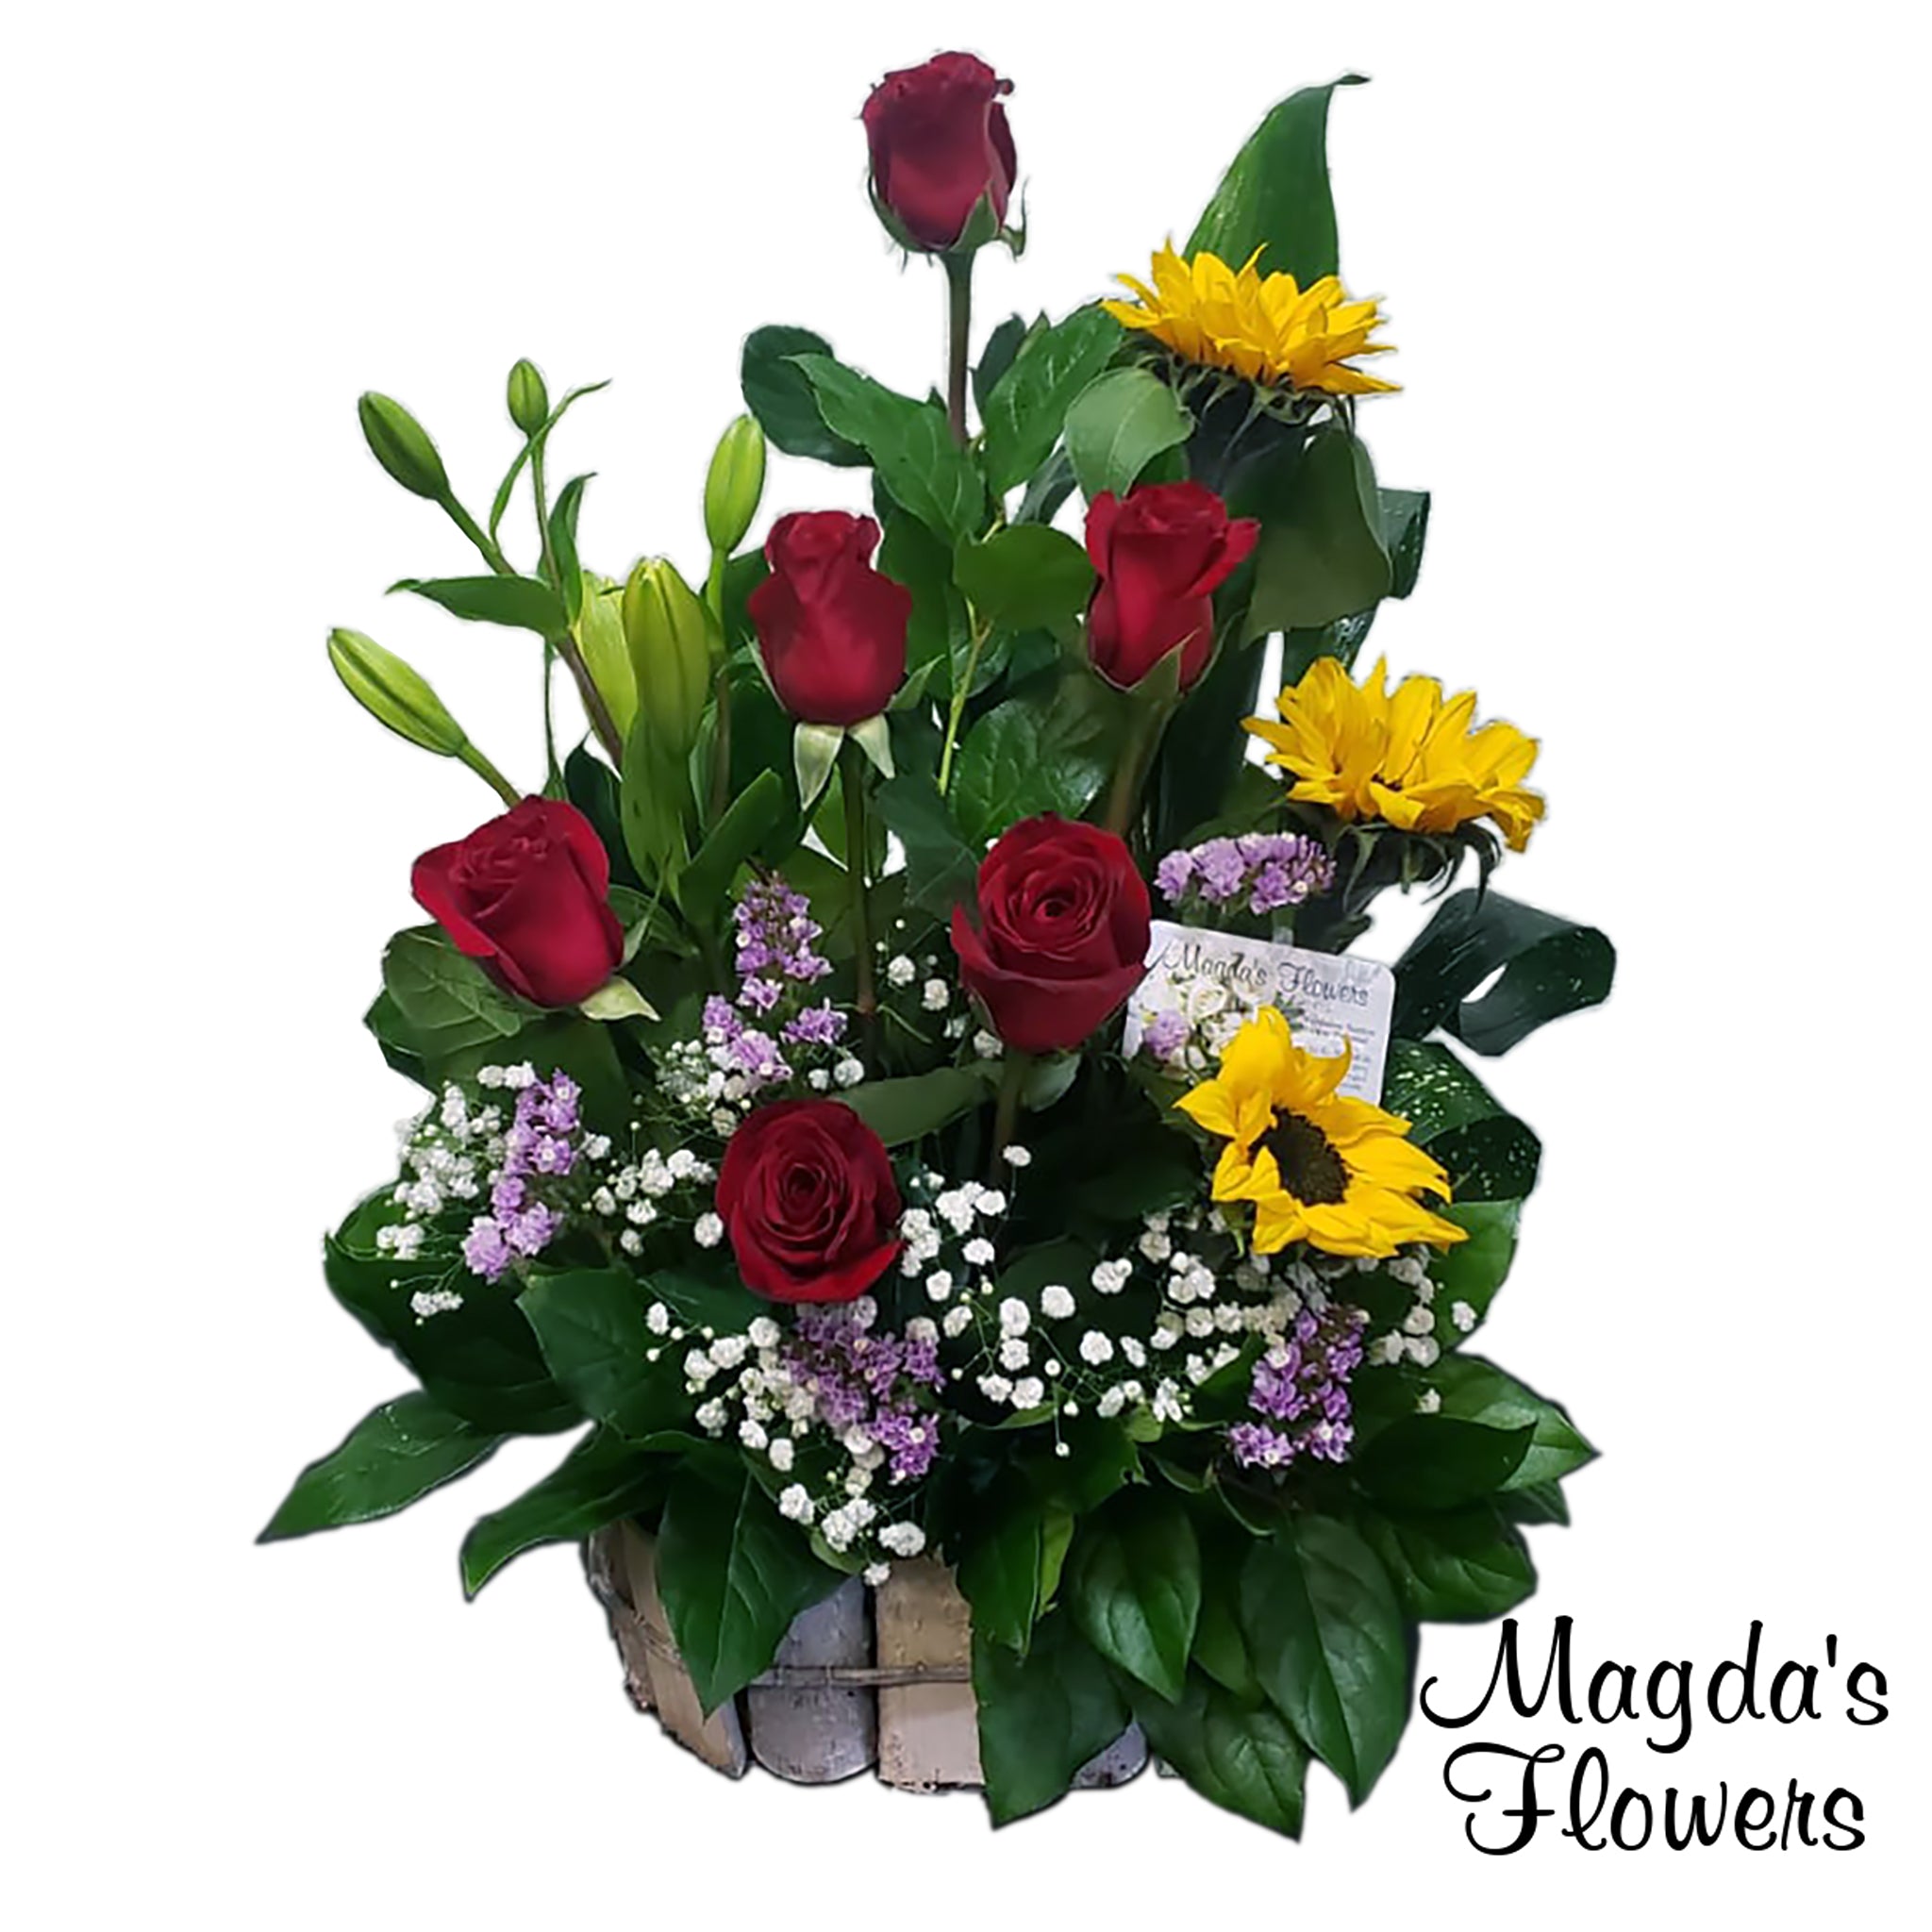 Red rose, Sunflower, Lilies floral basket - Magdas Flowers, Salinas Calfornia. Order flowers online today.